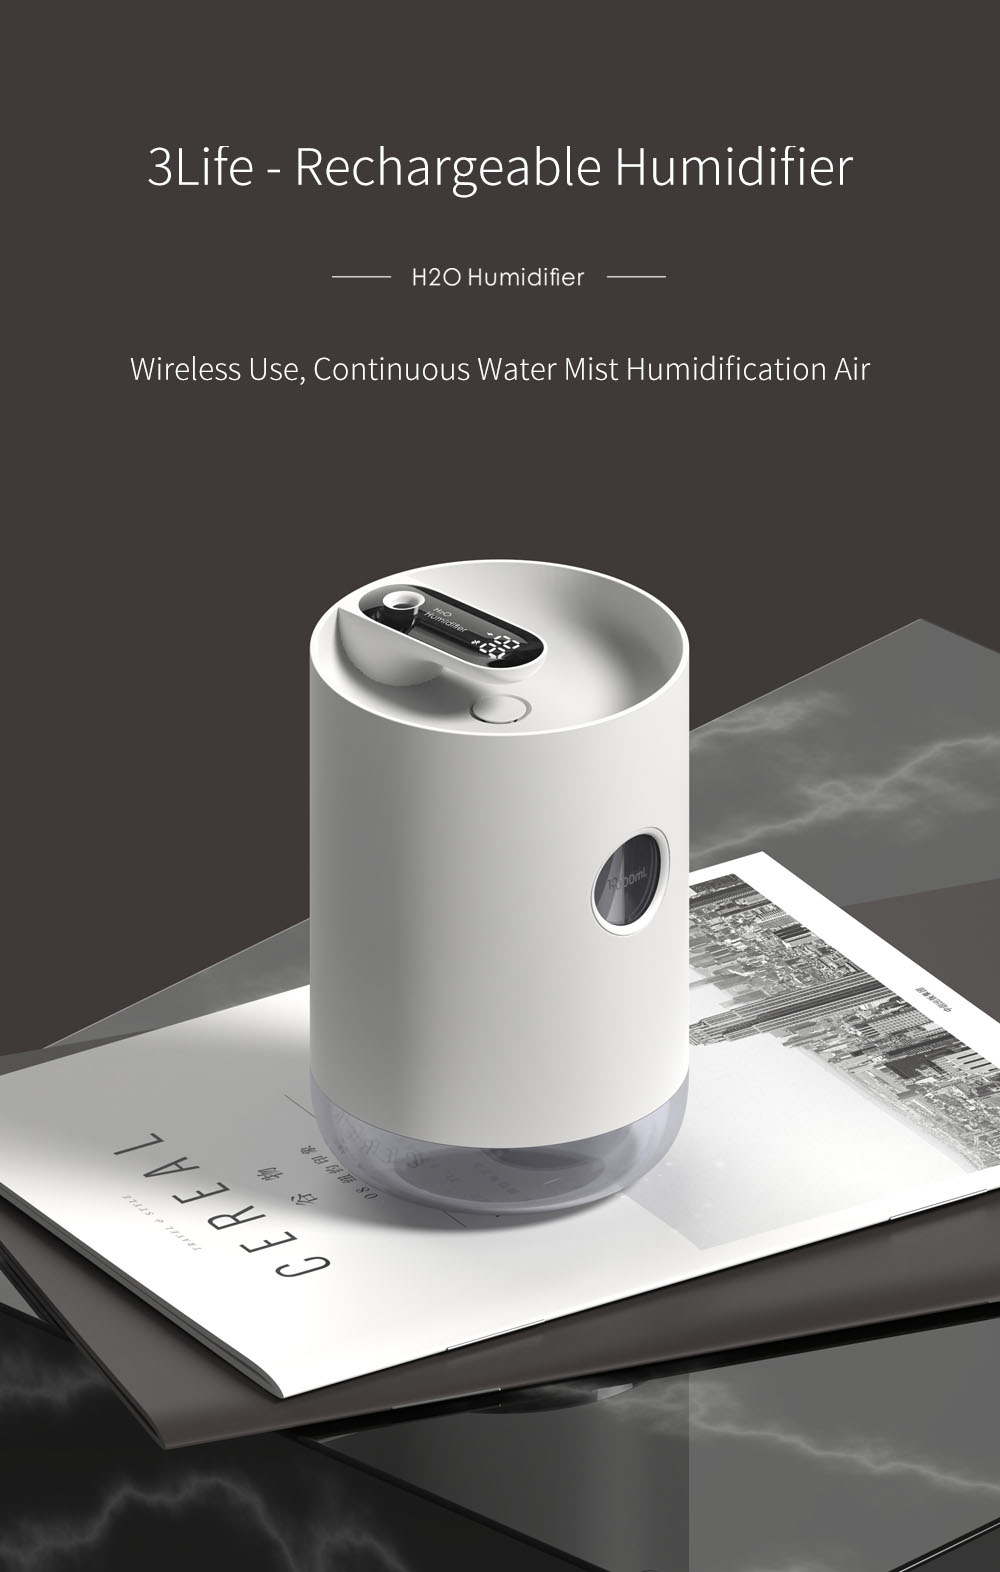 3Life-211-USB-Charging-Humidifier-Two-Mode-Adjusture-Night-Light-LED-Power-Display-Air-Humidifier-1762427-1